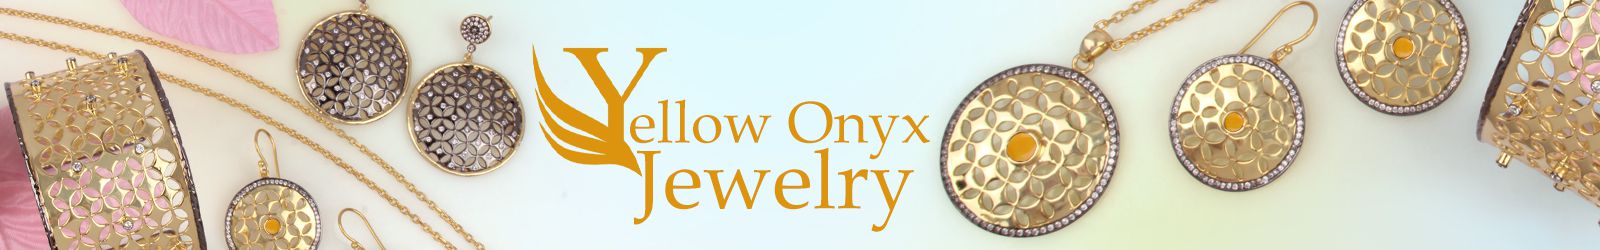 Silver Yellow Onyx Jewelry Wholesale Supplier